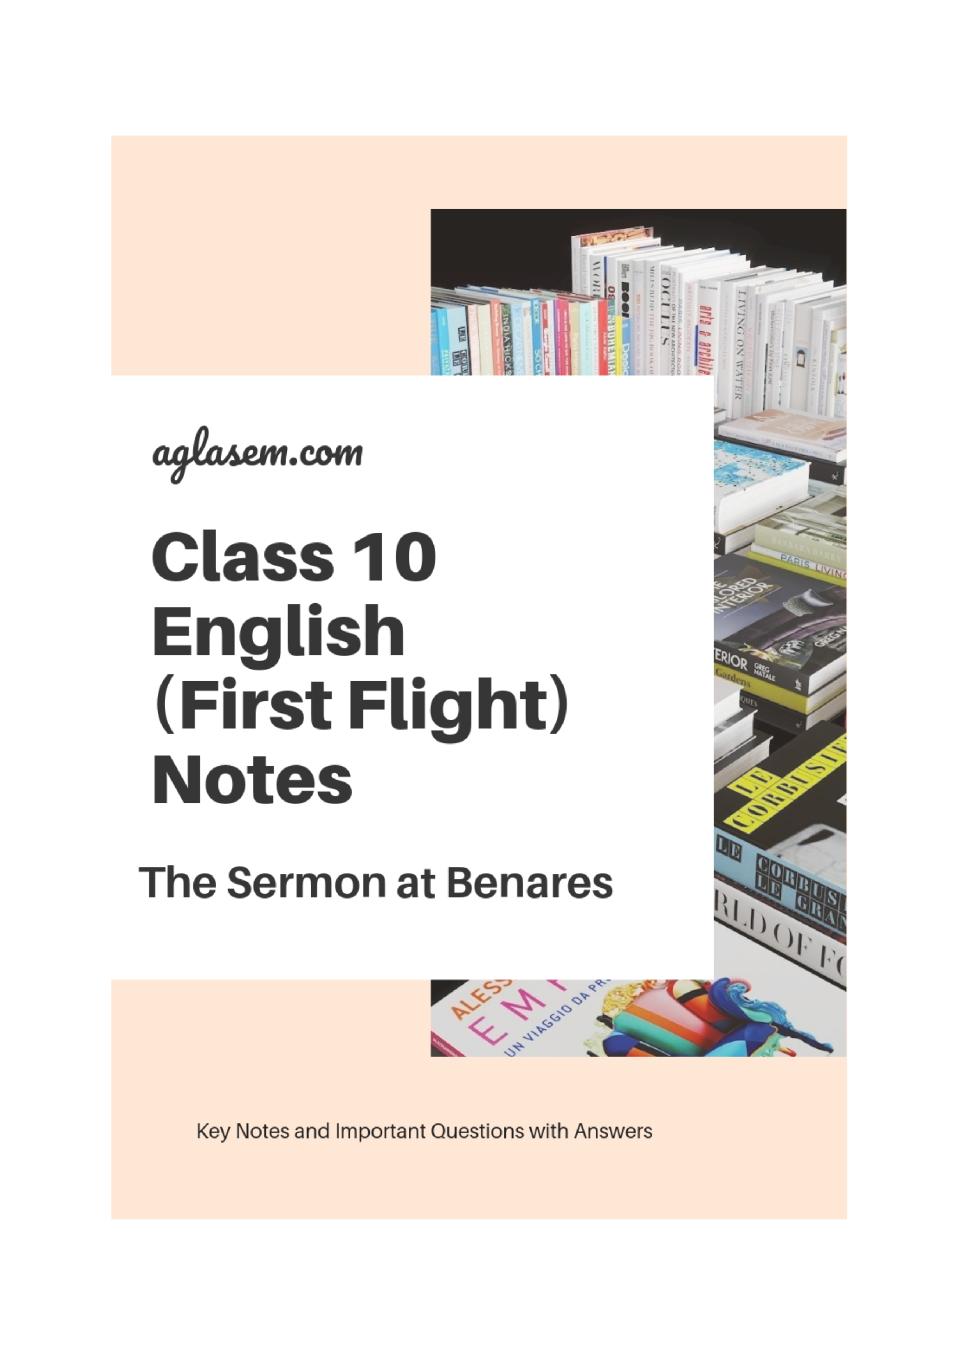 Class 10 English First Flight Notes For The Sermon at Benaras - Page 1